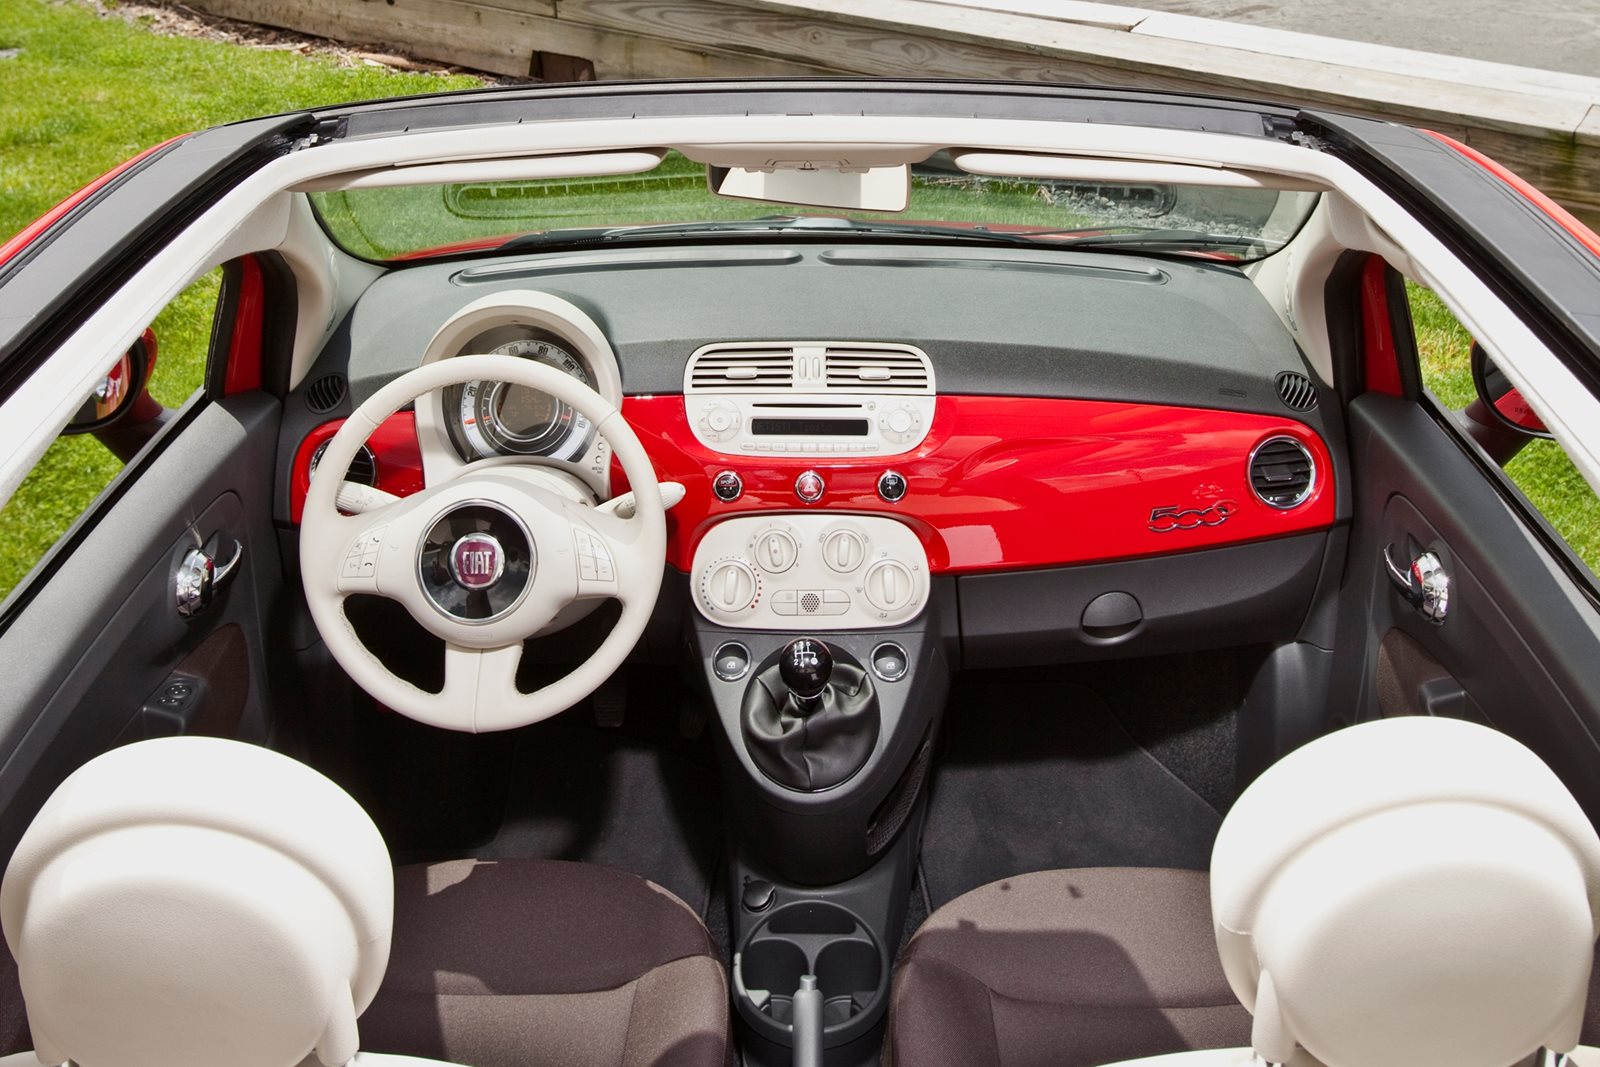 Fiat 500 C is convertible version of the Fiat 500 city car with